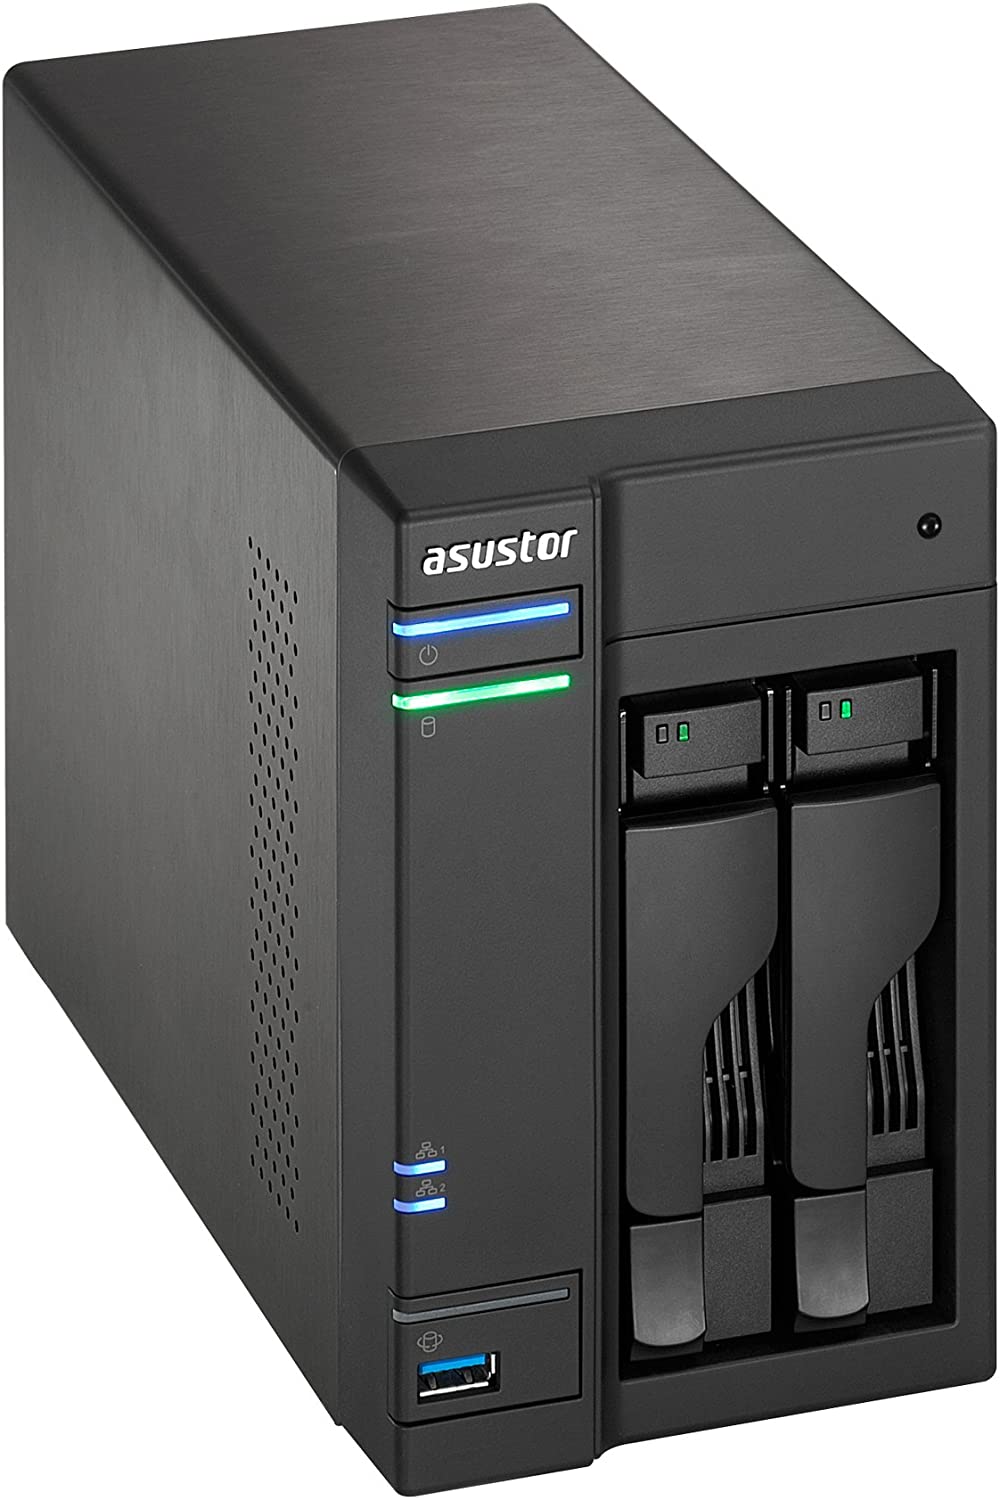 AS6102T NAS COMPLETE WITH TWO WD RED FIXED DRIVES WD10EFRX-68FYTN0 NASWARE 3.0